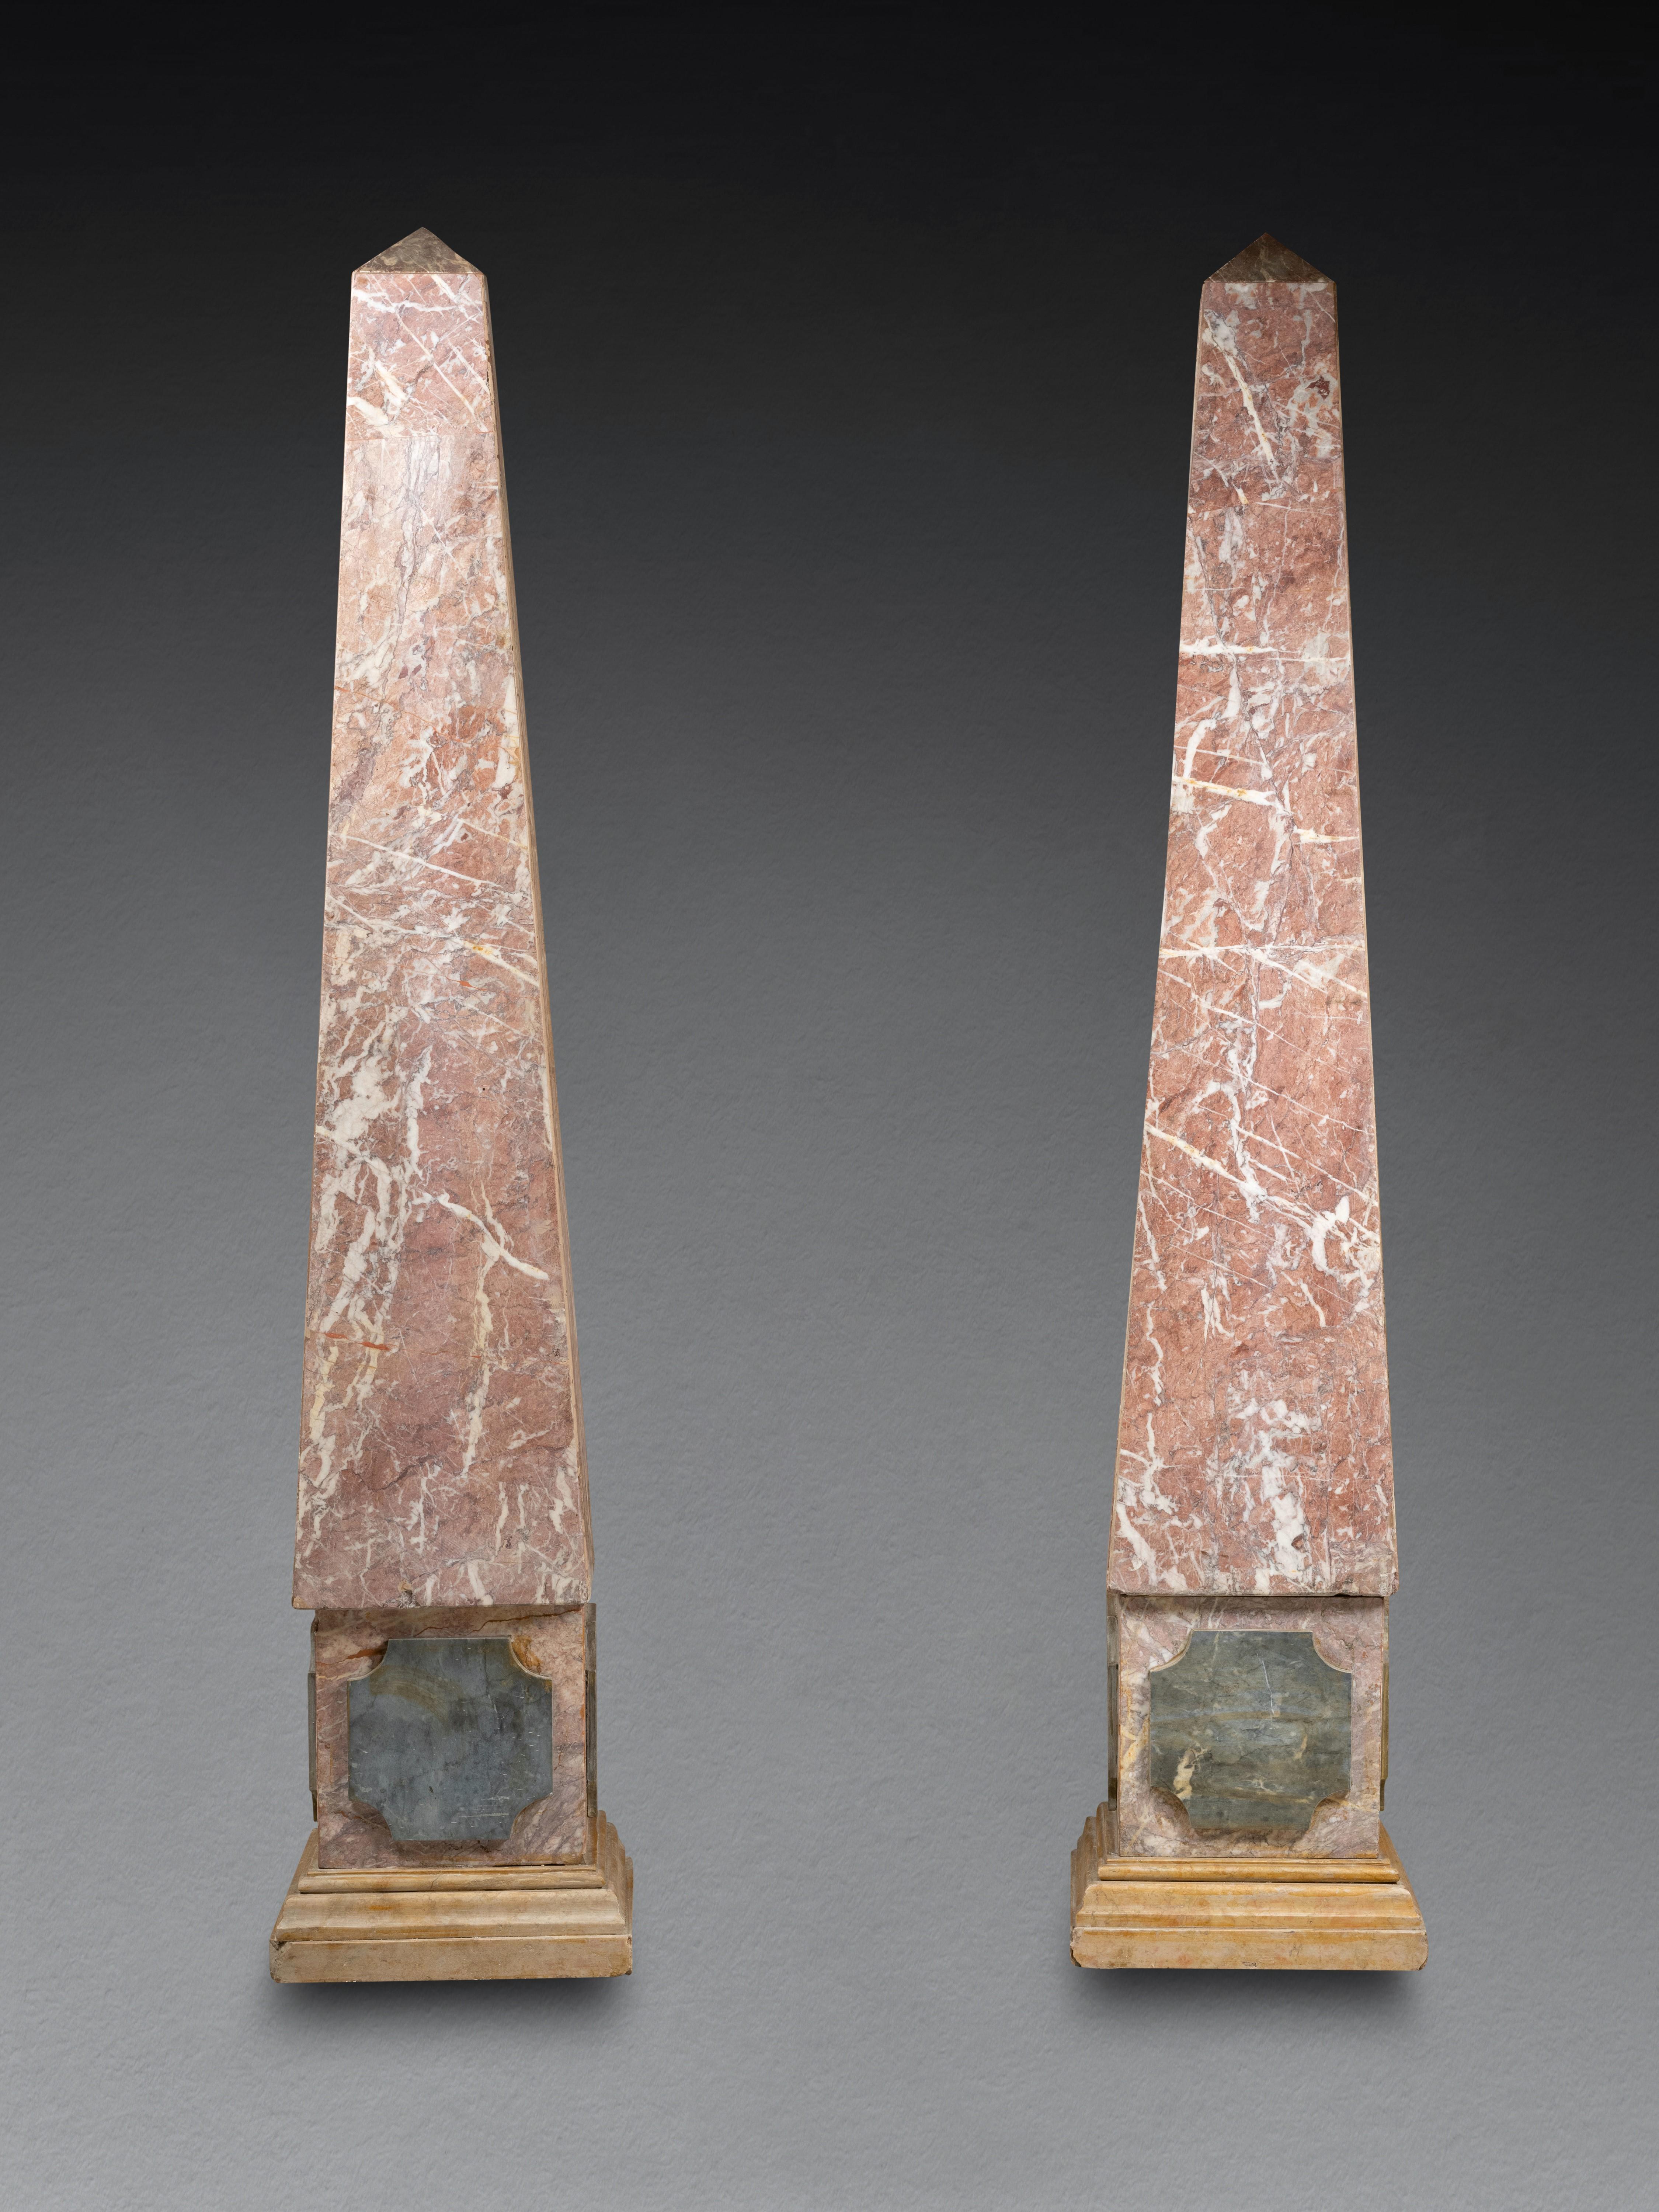 Monumental pair of obelisks veneered with following marbles:  pink marble of the Pyrenees, blue Turquin and yellow of Siena.
A very decorative pair of tall obelisks that would look great in any interior.
The obelisks are hollow and made in two parts